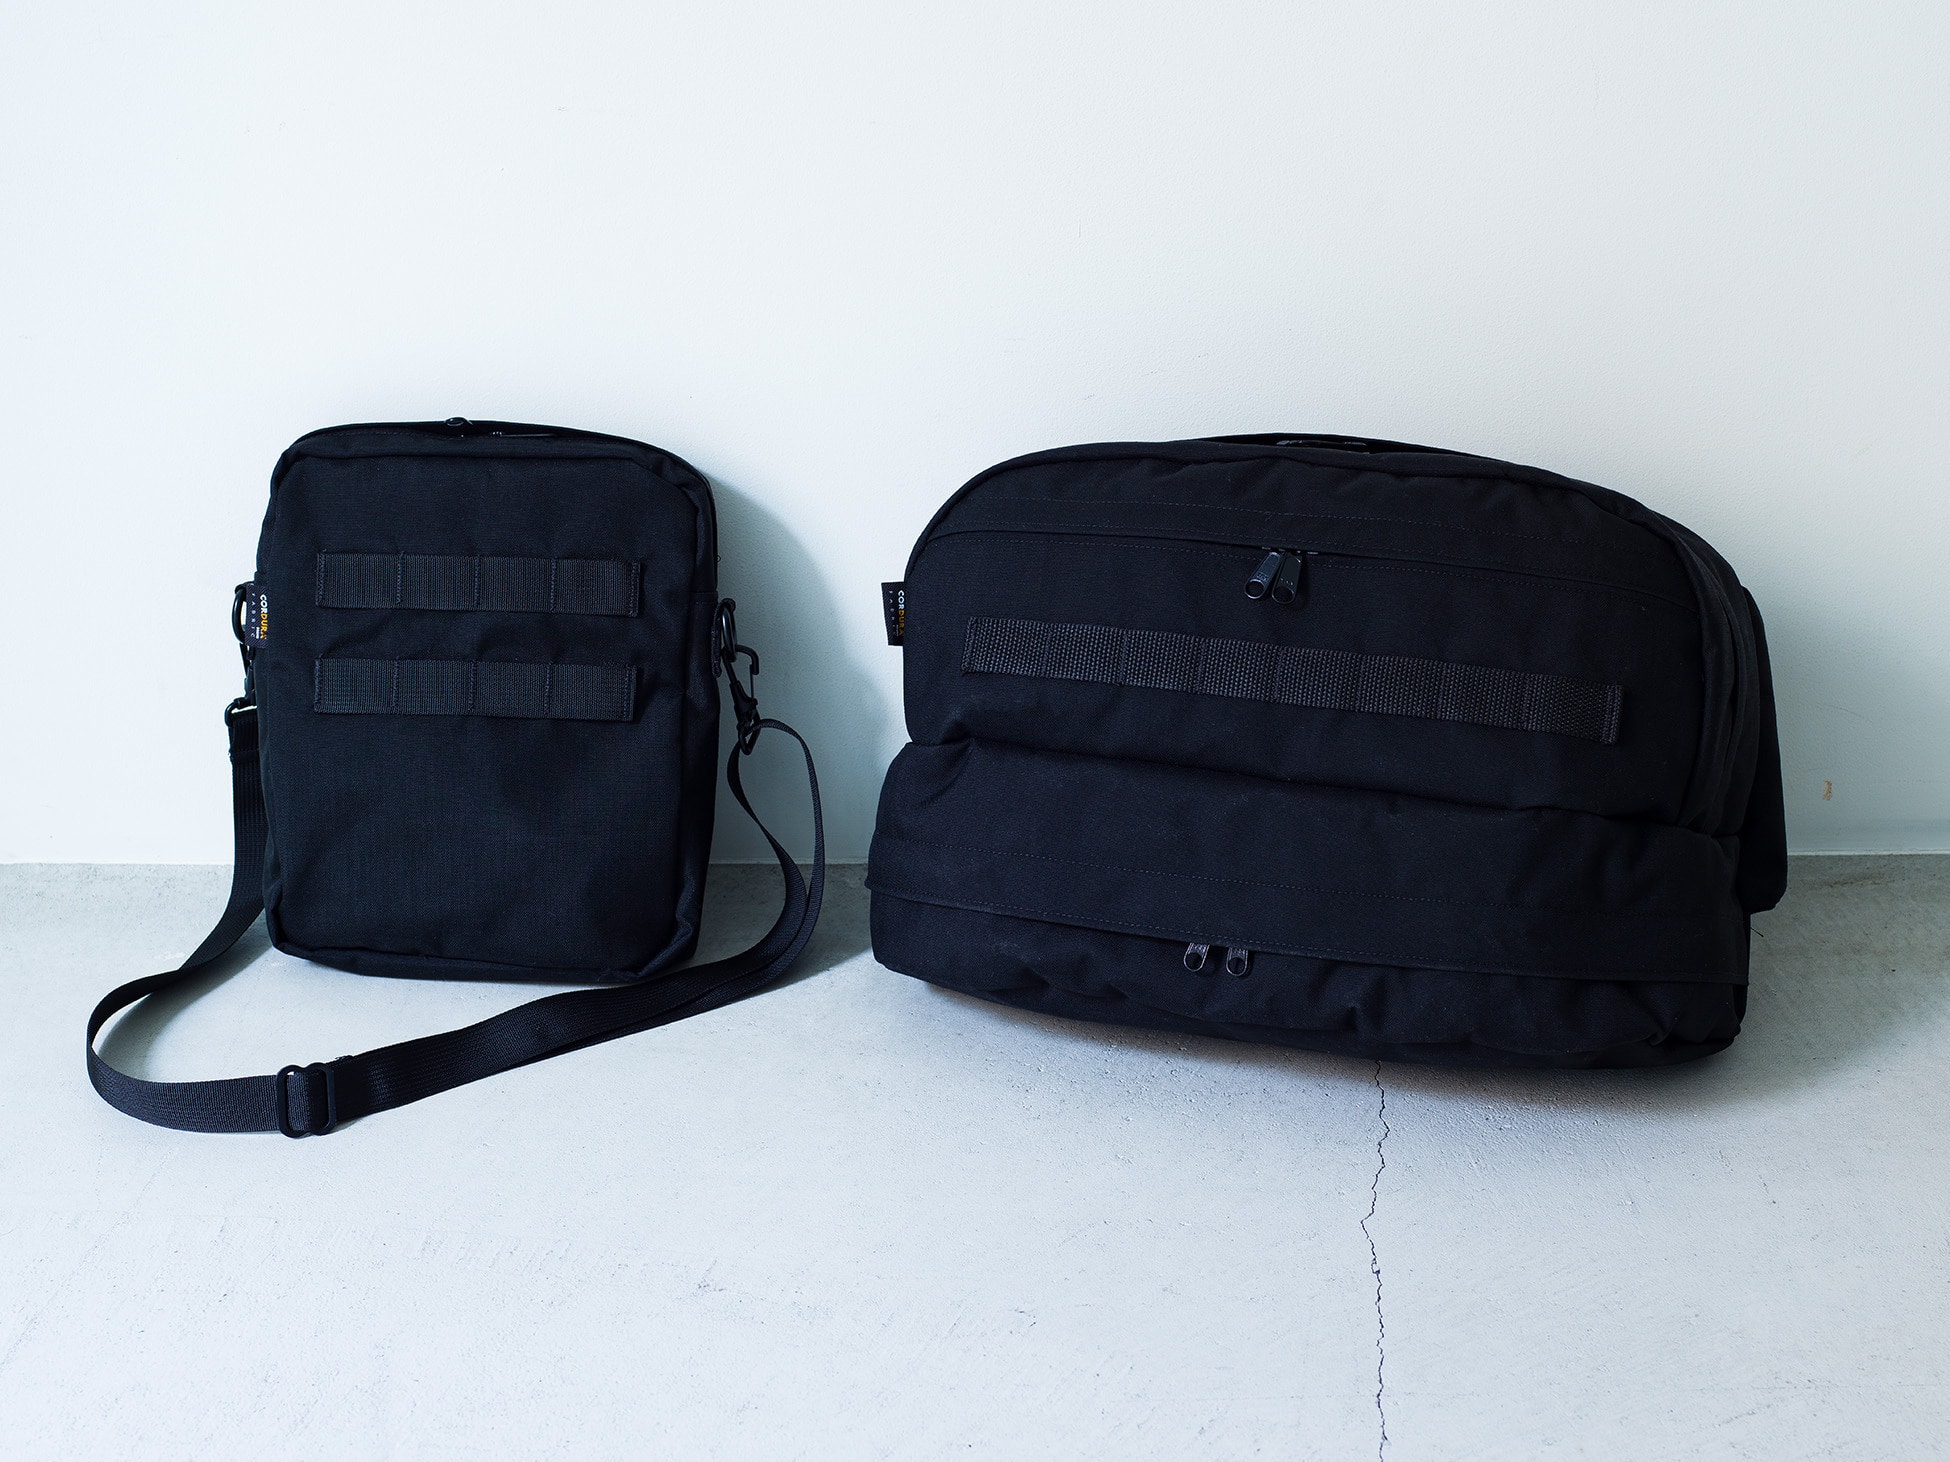 JIM MELVILLE for Ron Herman Bag Collection 2.19(Sat) New Arrival